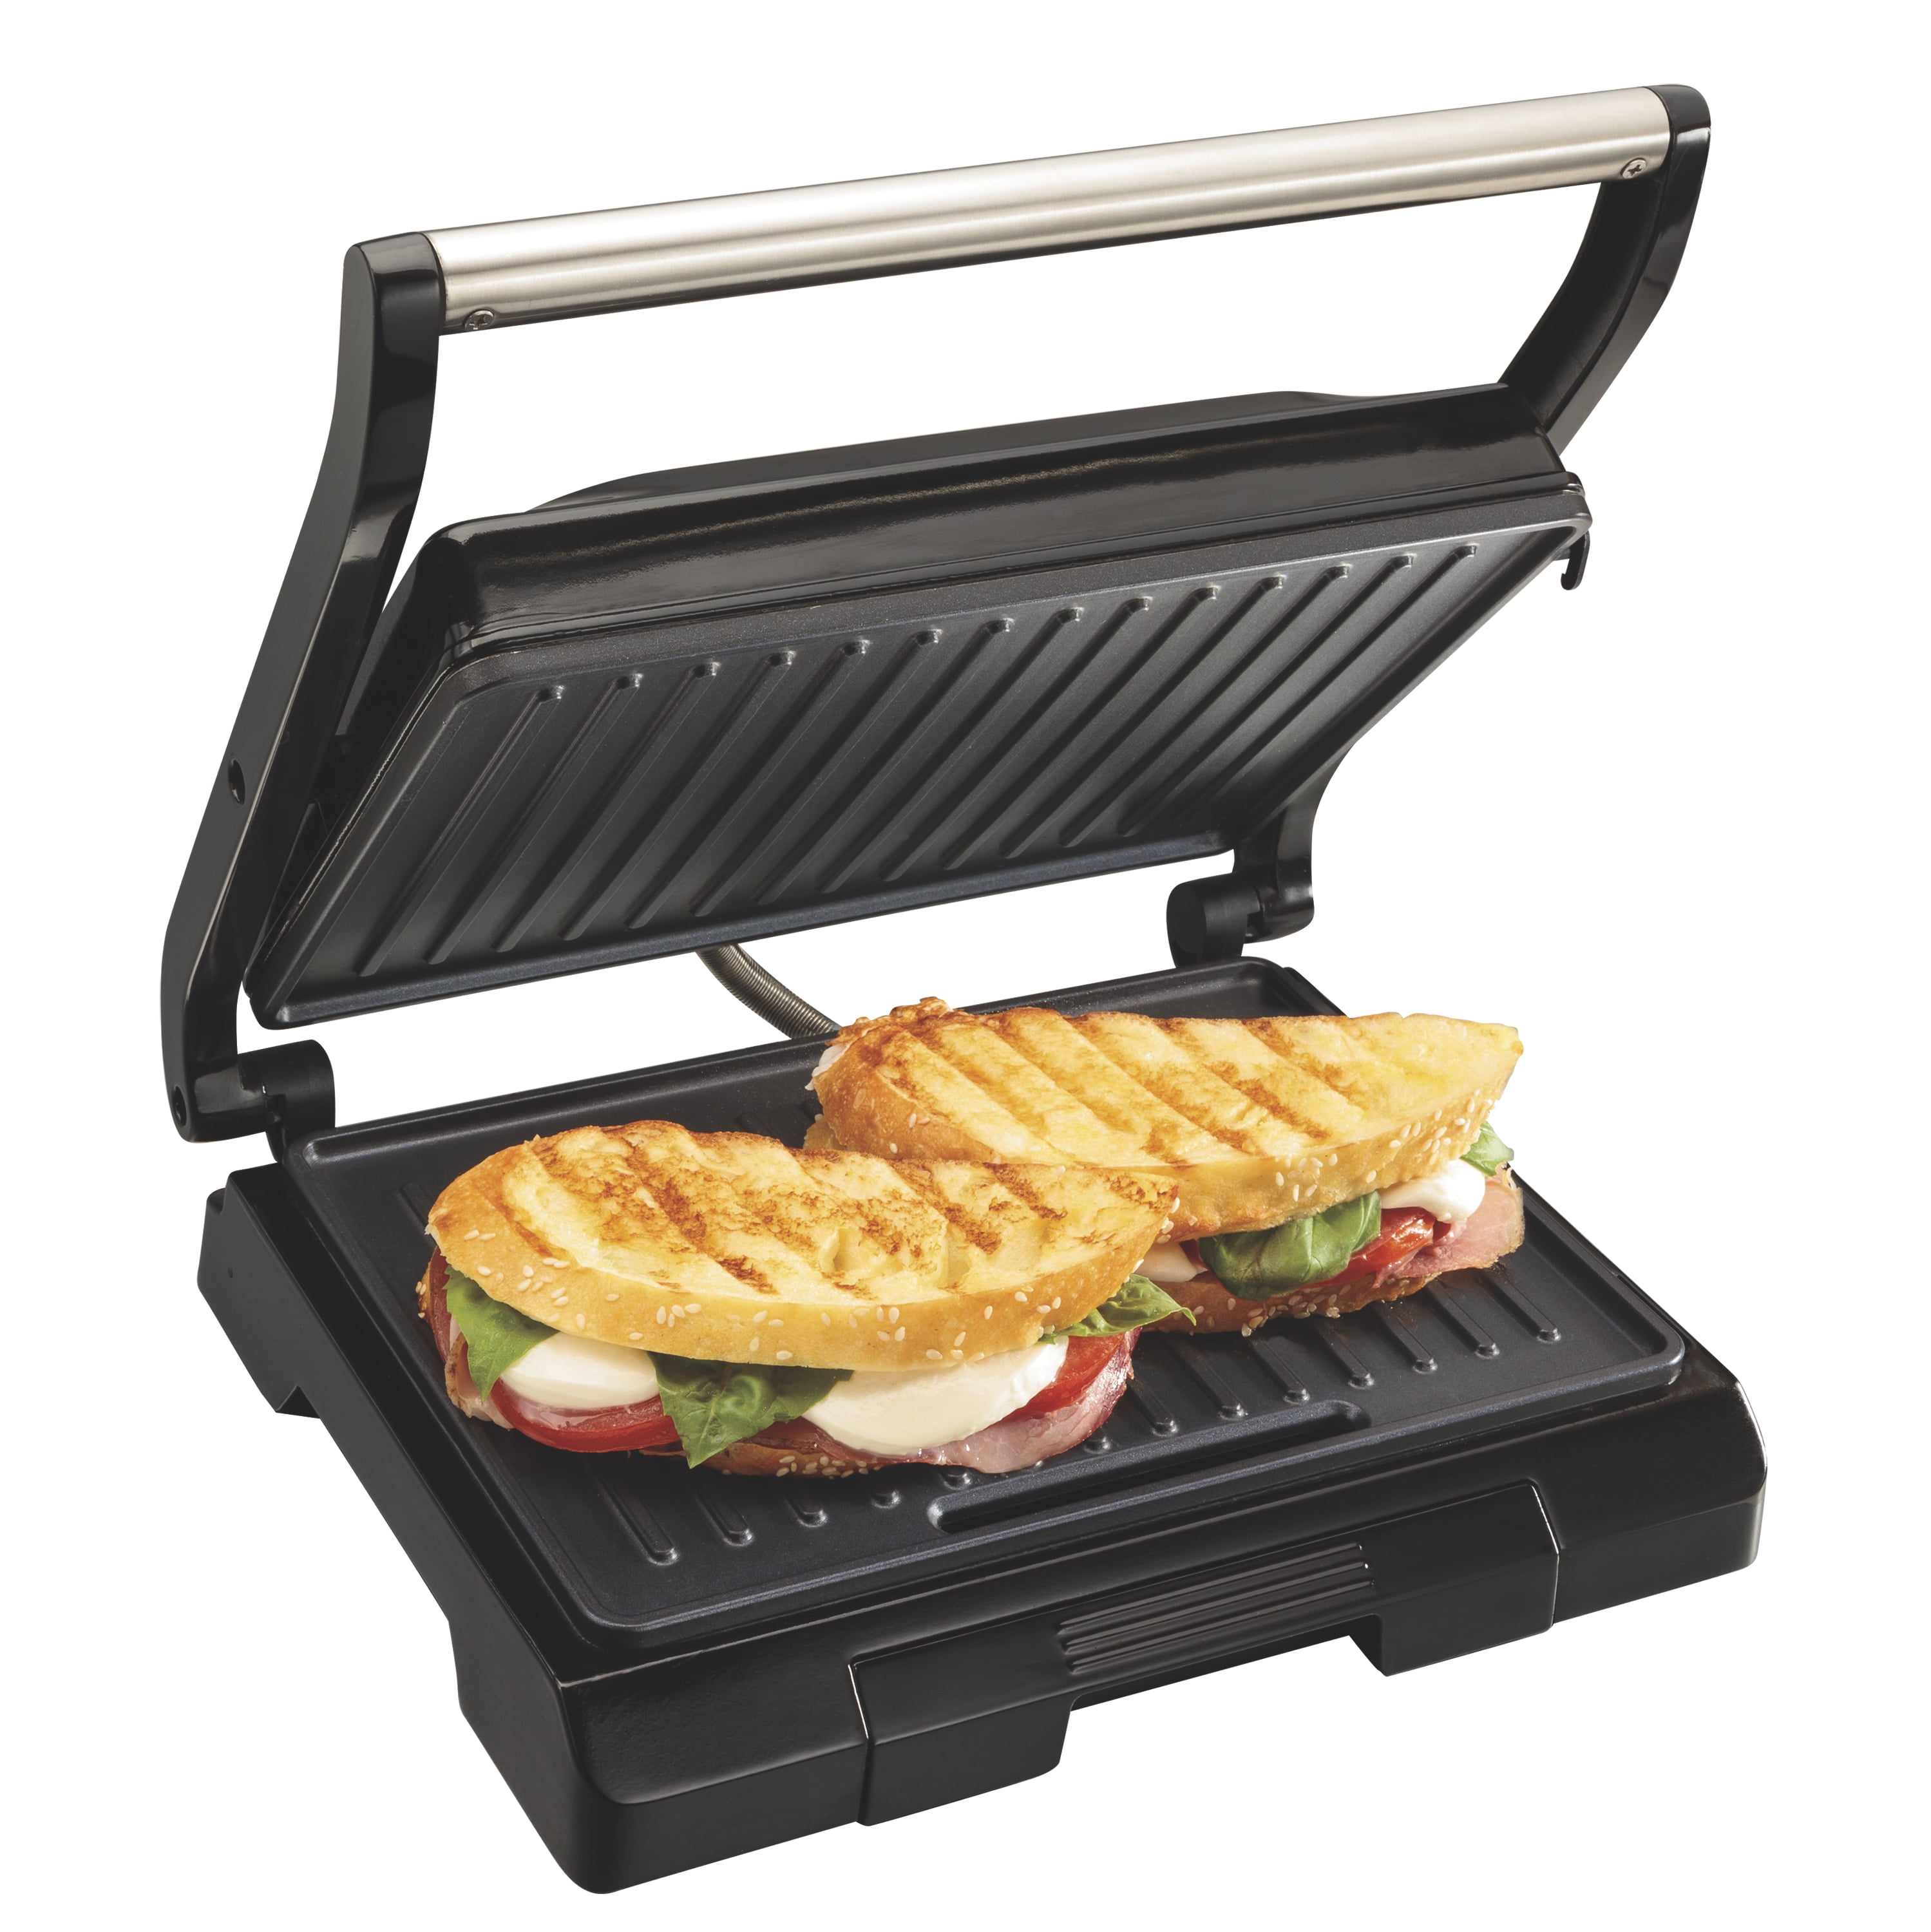  Dash Mini Maker Portable Grill Machine + Panini Press for  Gourmet Burgers, Sandwiches, Chicken + Other On the Go Breakfast, Lunch, or  Snacks with Recipe Guide - Aqua: Home & Kitchen